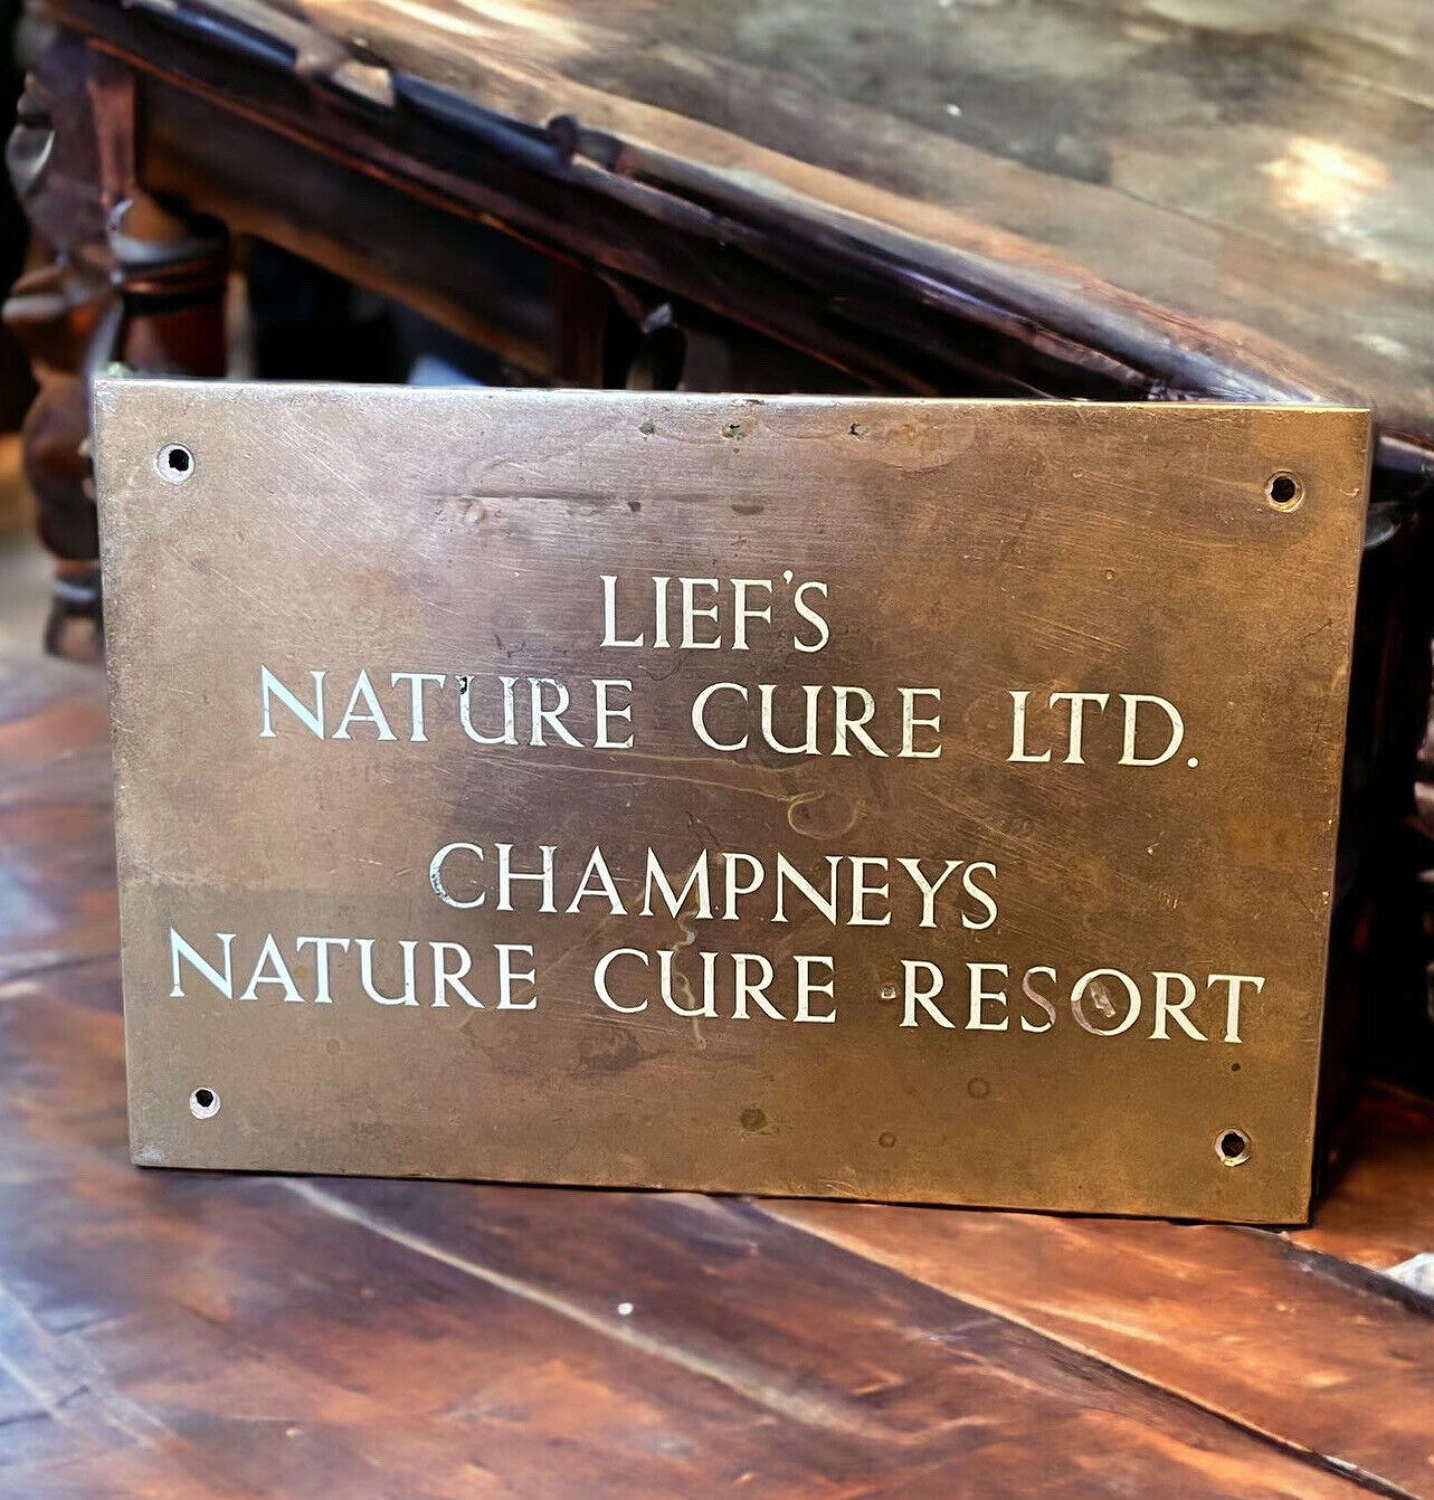 Original copper and enamel sign from Champneys nature resort